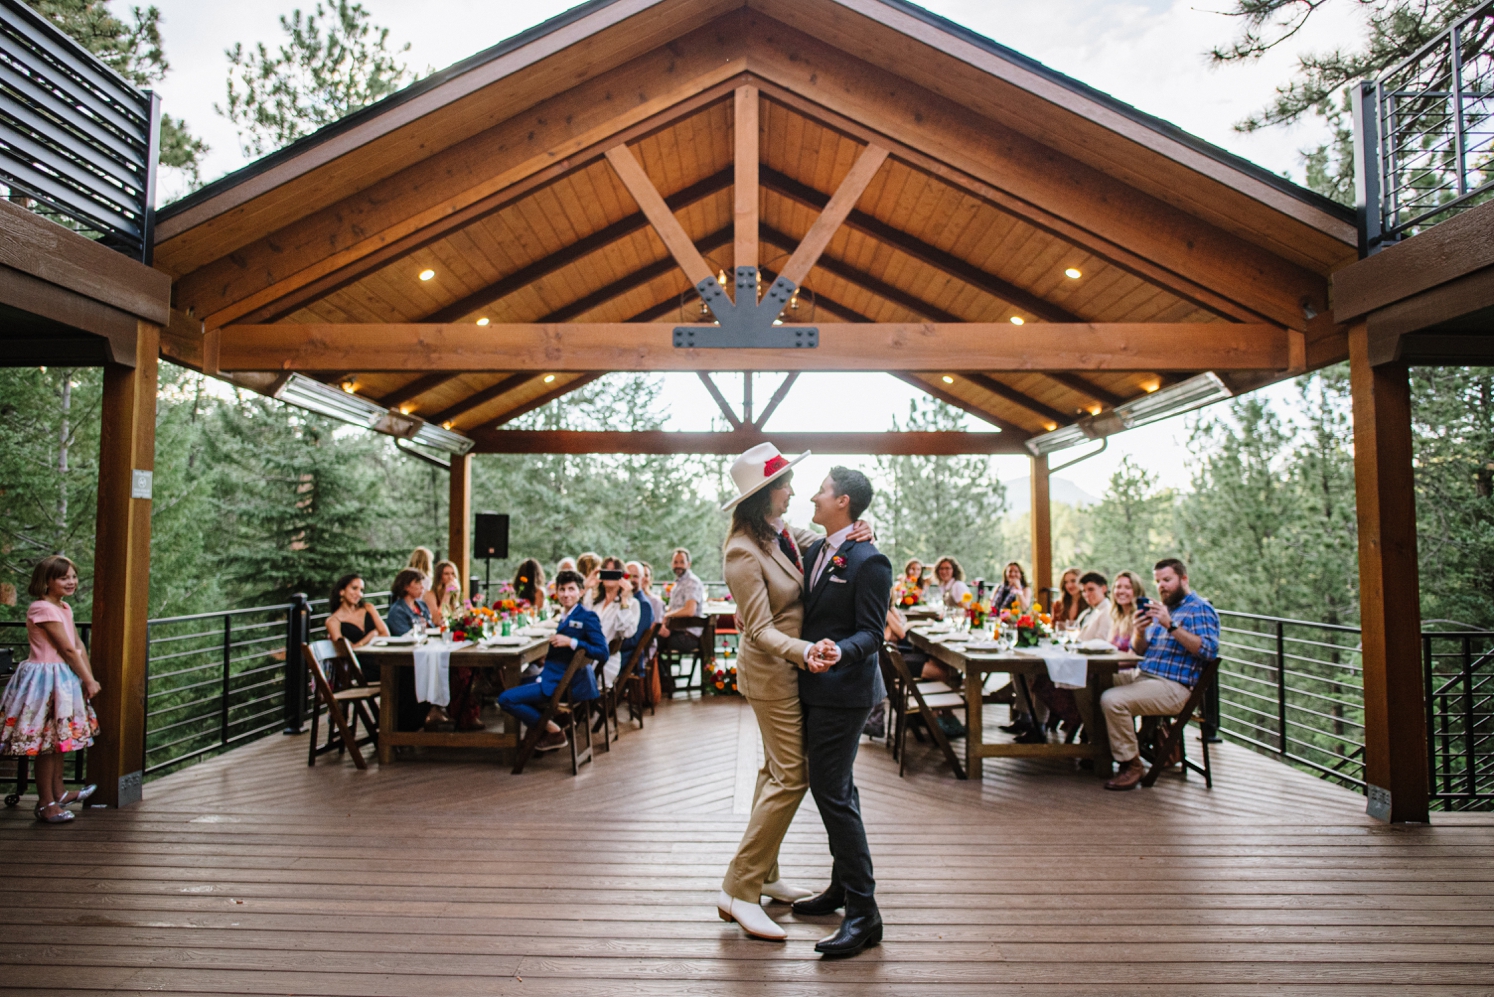 Couple sharing first dance together after LGBTQ wedding ceremony | McArthur Weddings and Events